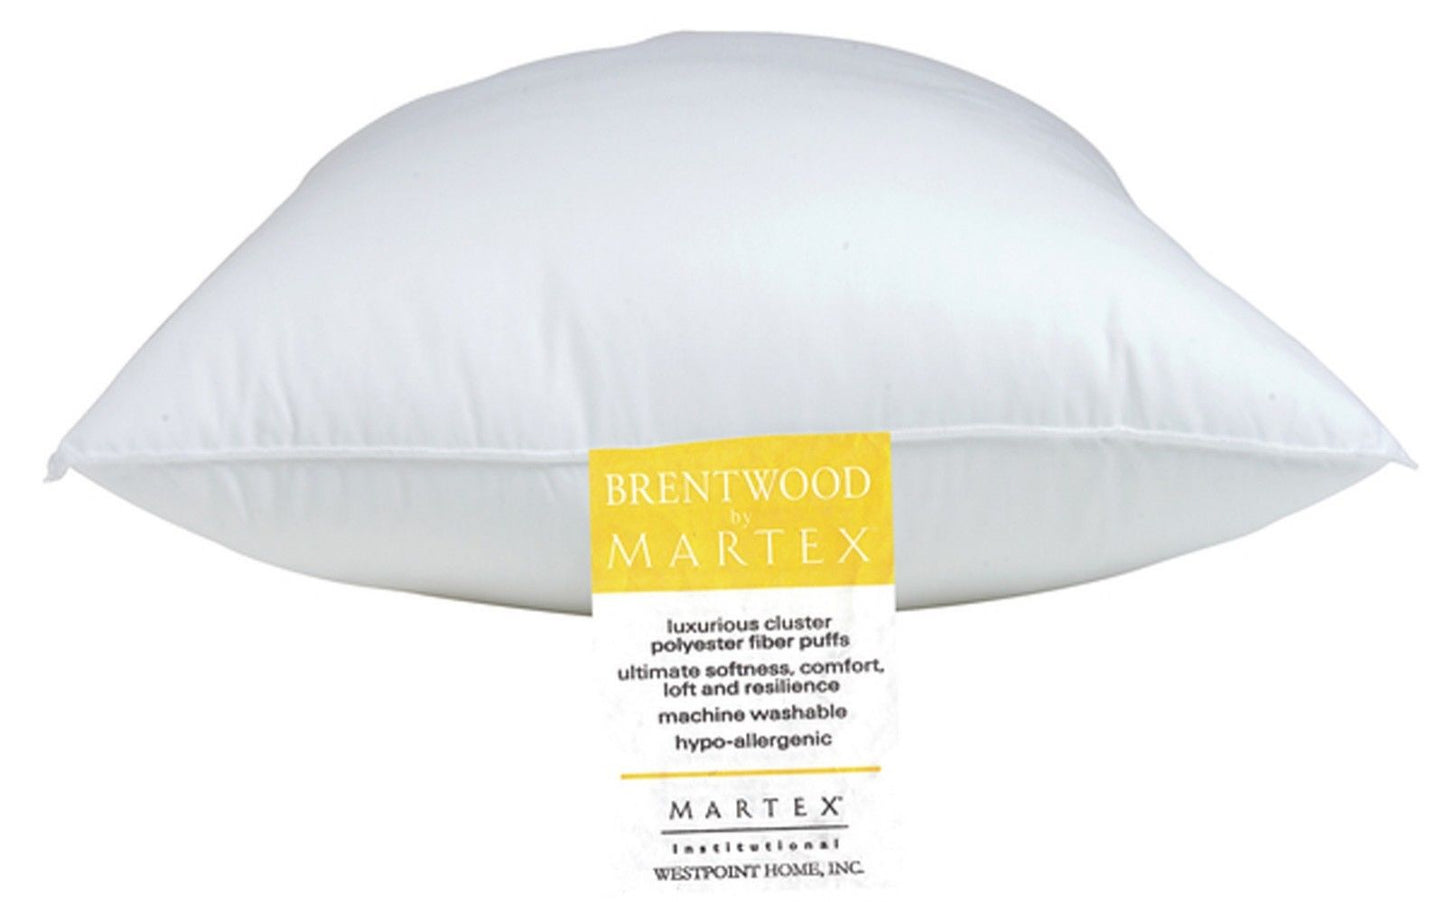 Martex Brentwood Gold Label King Homewood Suites Hotel Pillow